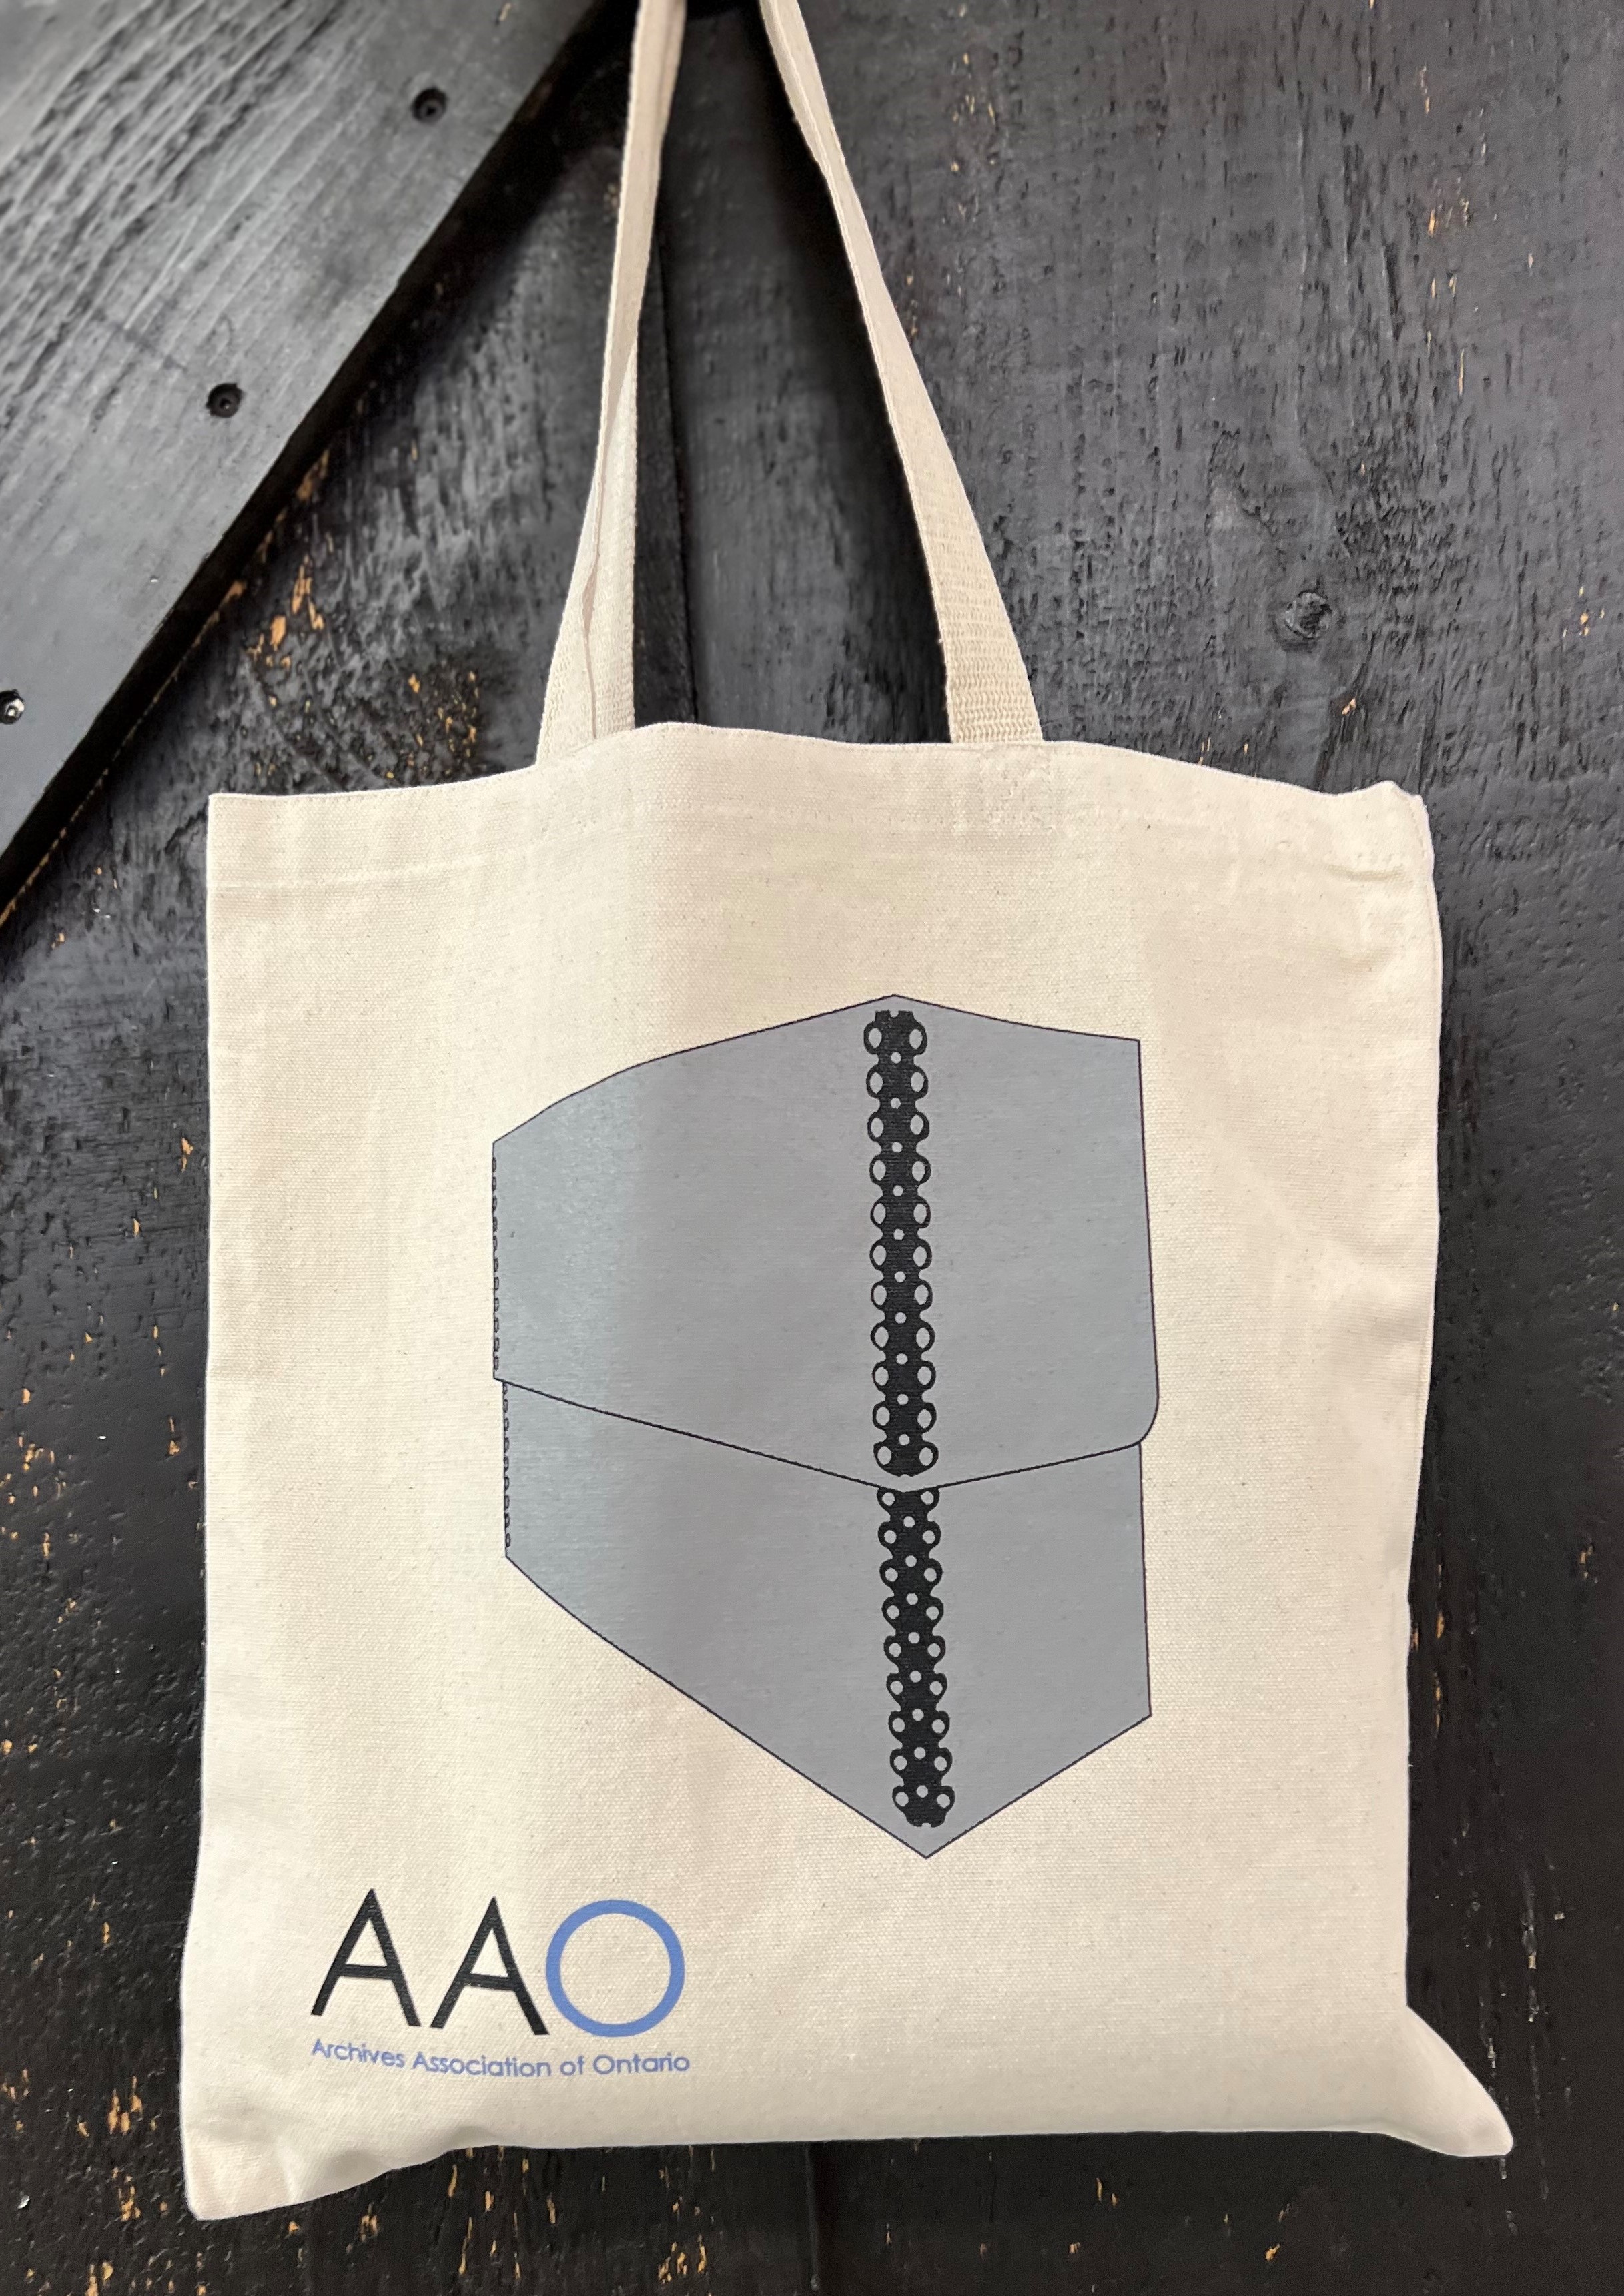 Tote bag with an image of a Holinger box un grey and black above the AAO logo.